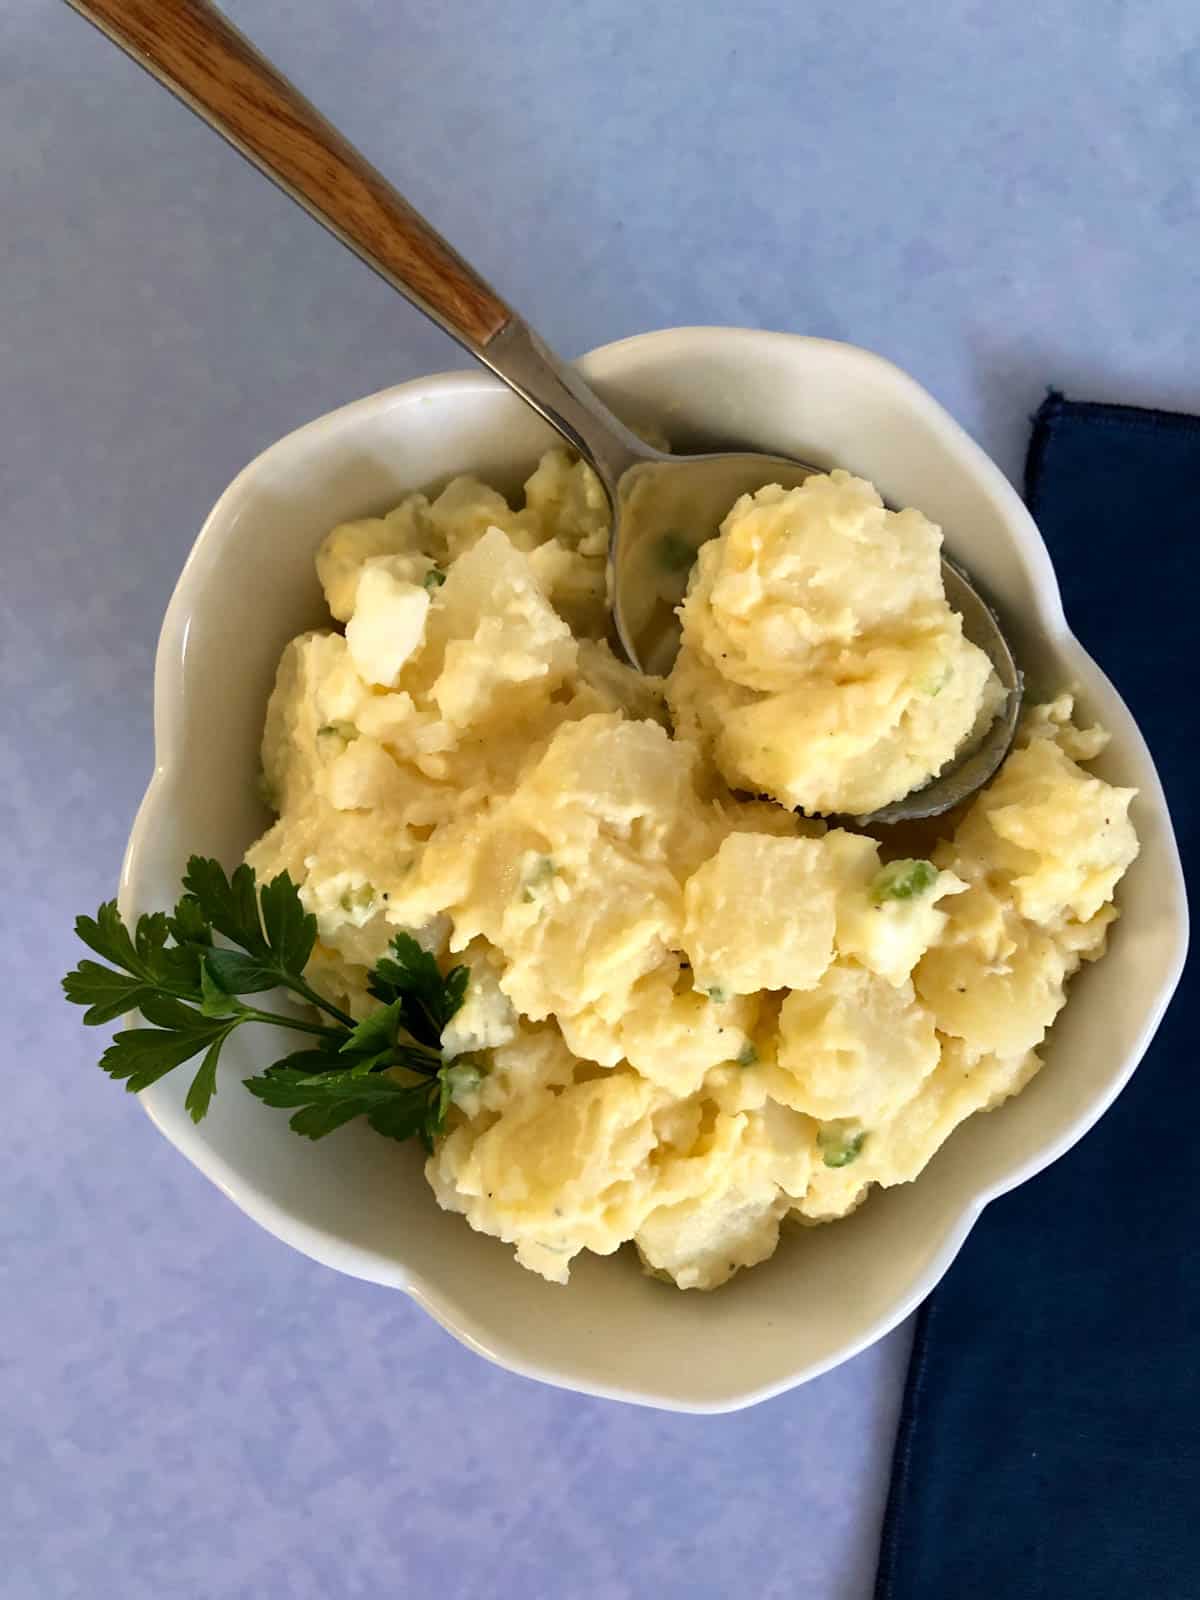 Potato salad in white bowl with blue background.